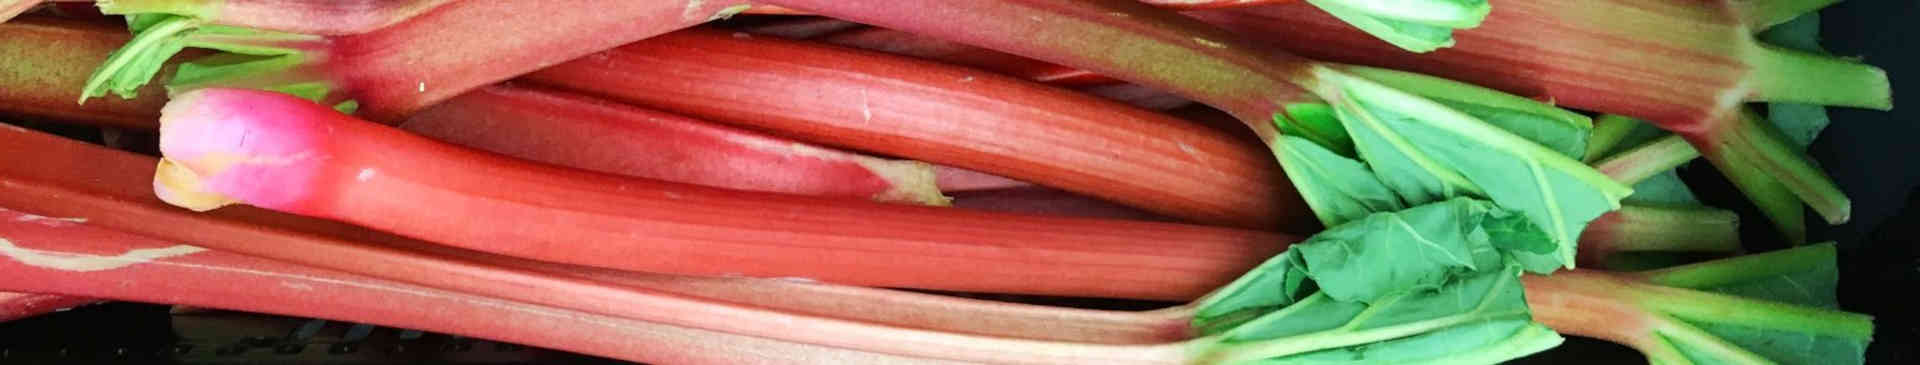 Growing Rhubarb from Crowns: Easy, Productive and Delicious